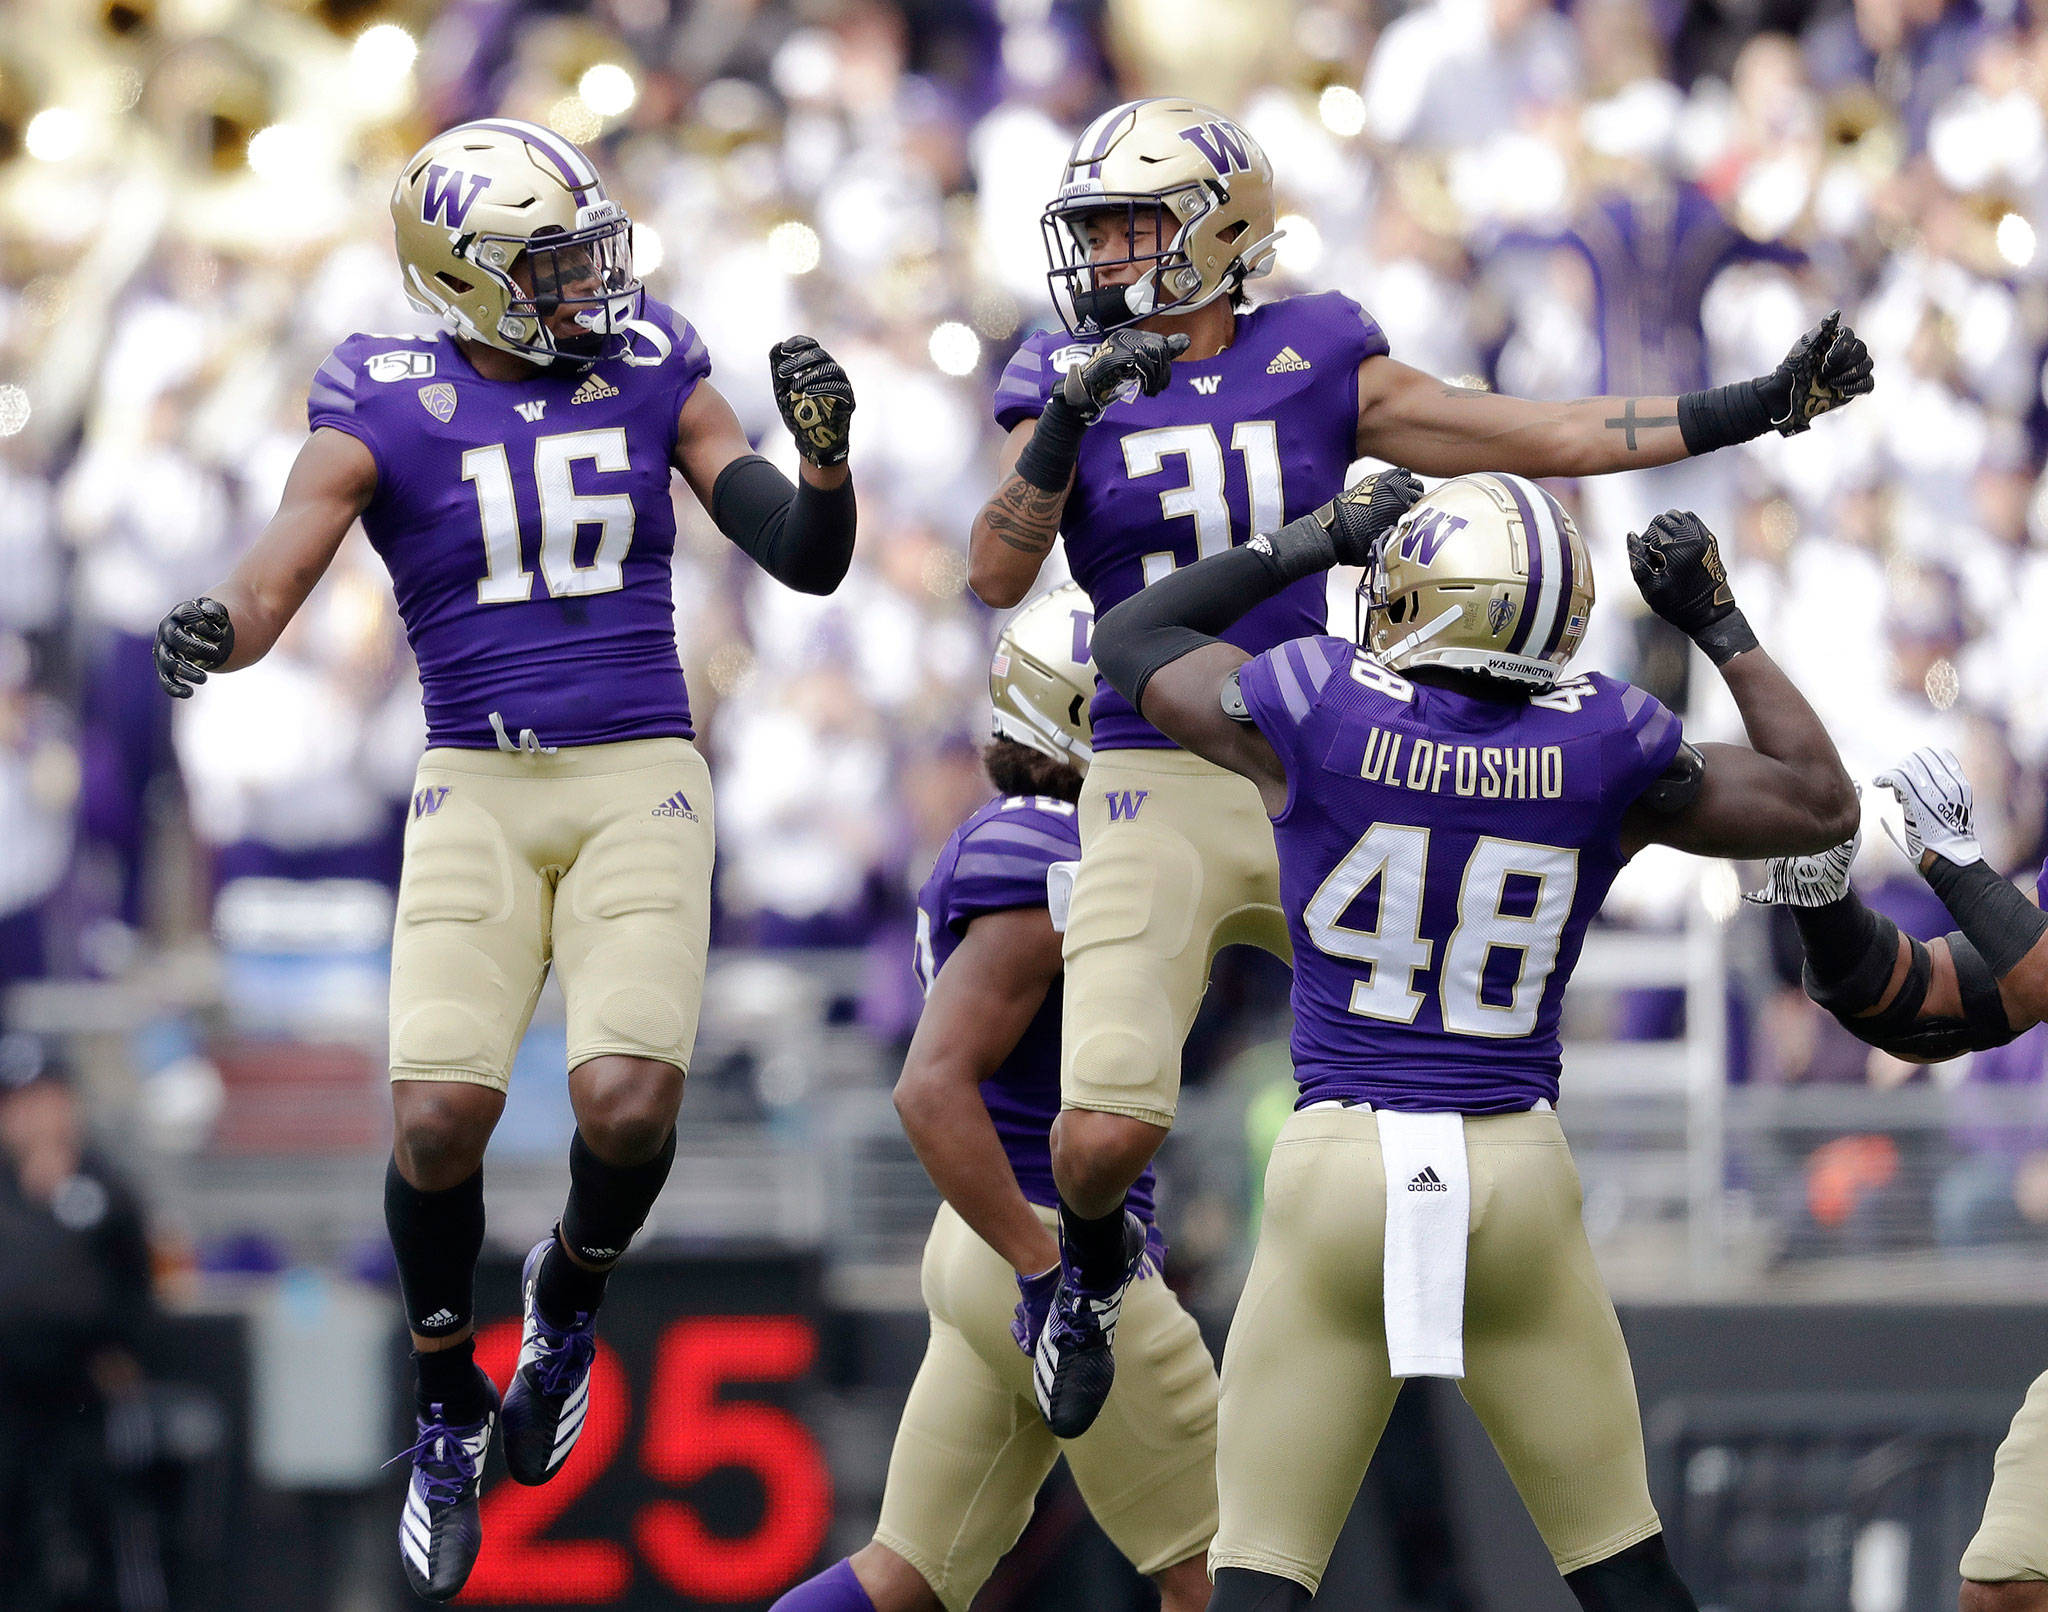 Washington’s Cameron Williams (16) celebrates his interception with teammate Kamren Fabiculanan (31) during the first half of a game against USC on Sept. 28, 2019, in Seattle. (AP Photo/Elaine Thompson)